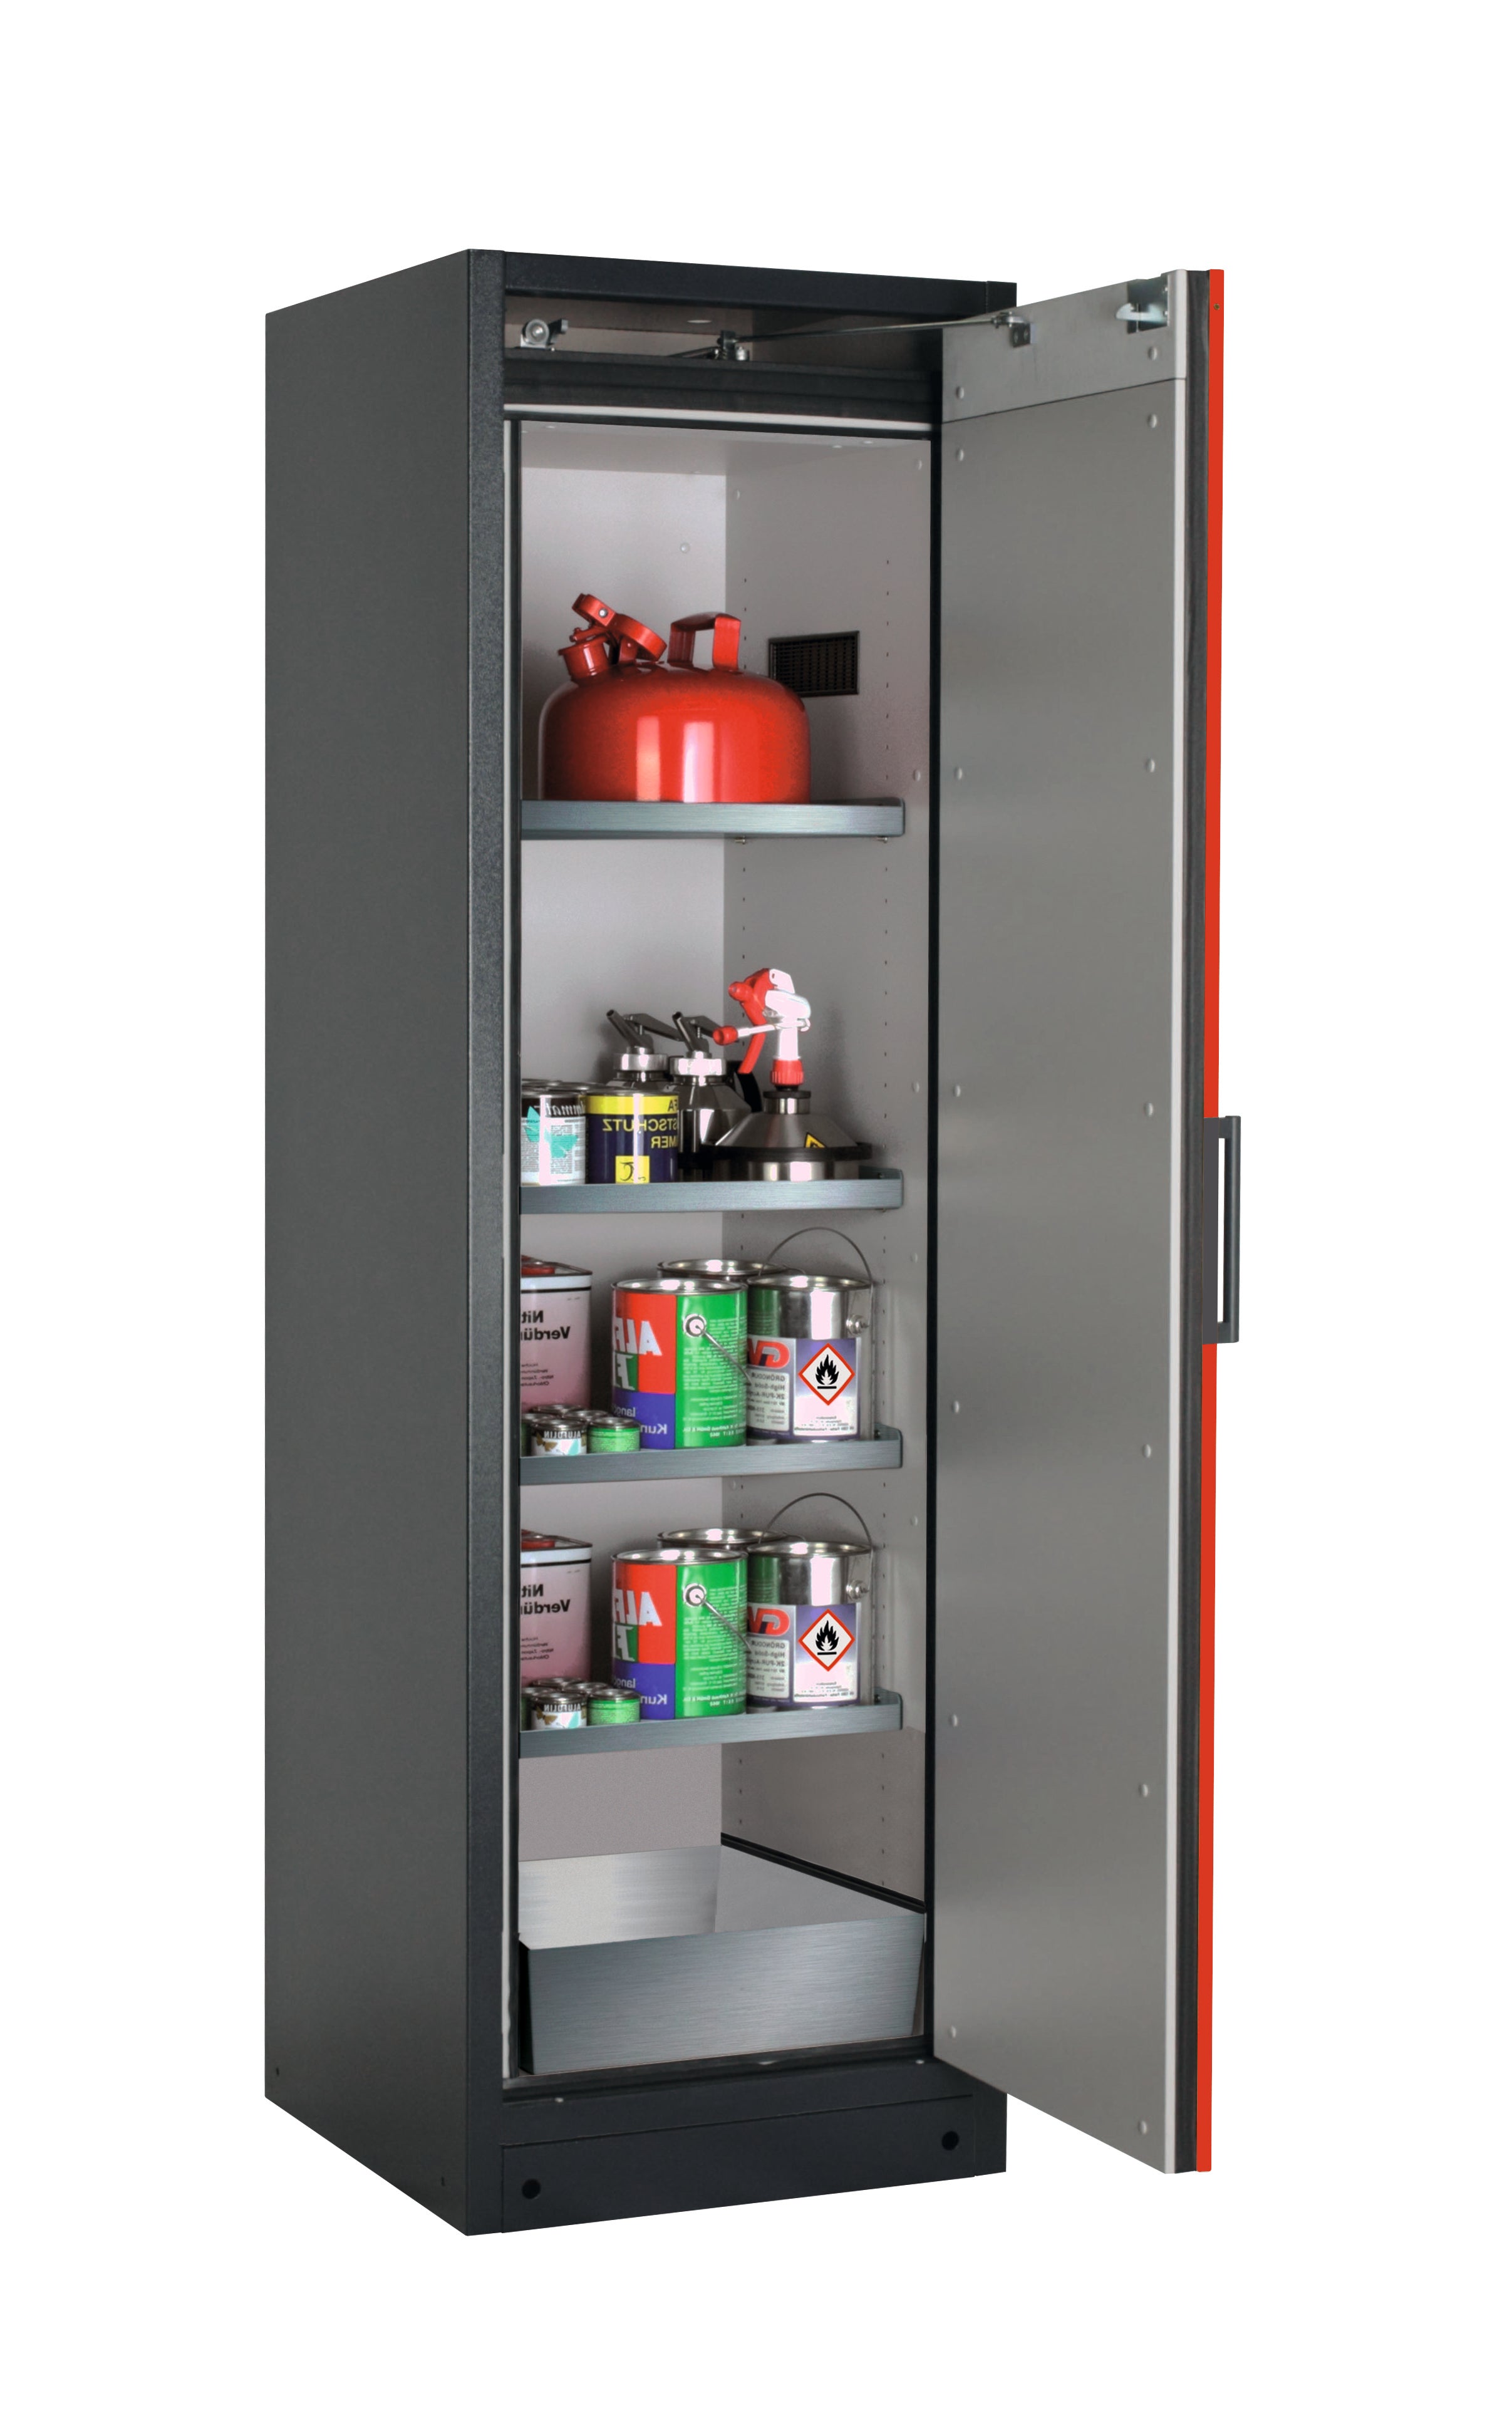 Type 90 safety storage cabinet Q-CLASSIC-90 model Q90.195.060.R in traffic red RAL 3020 with 4x shelf standard (stainless steel 1.4301),